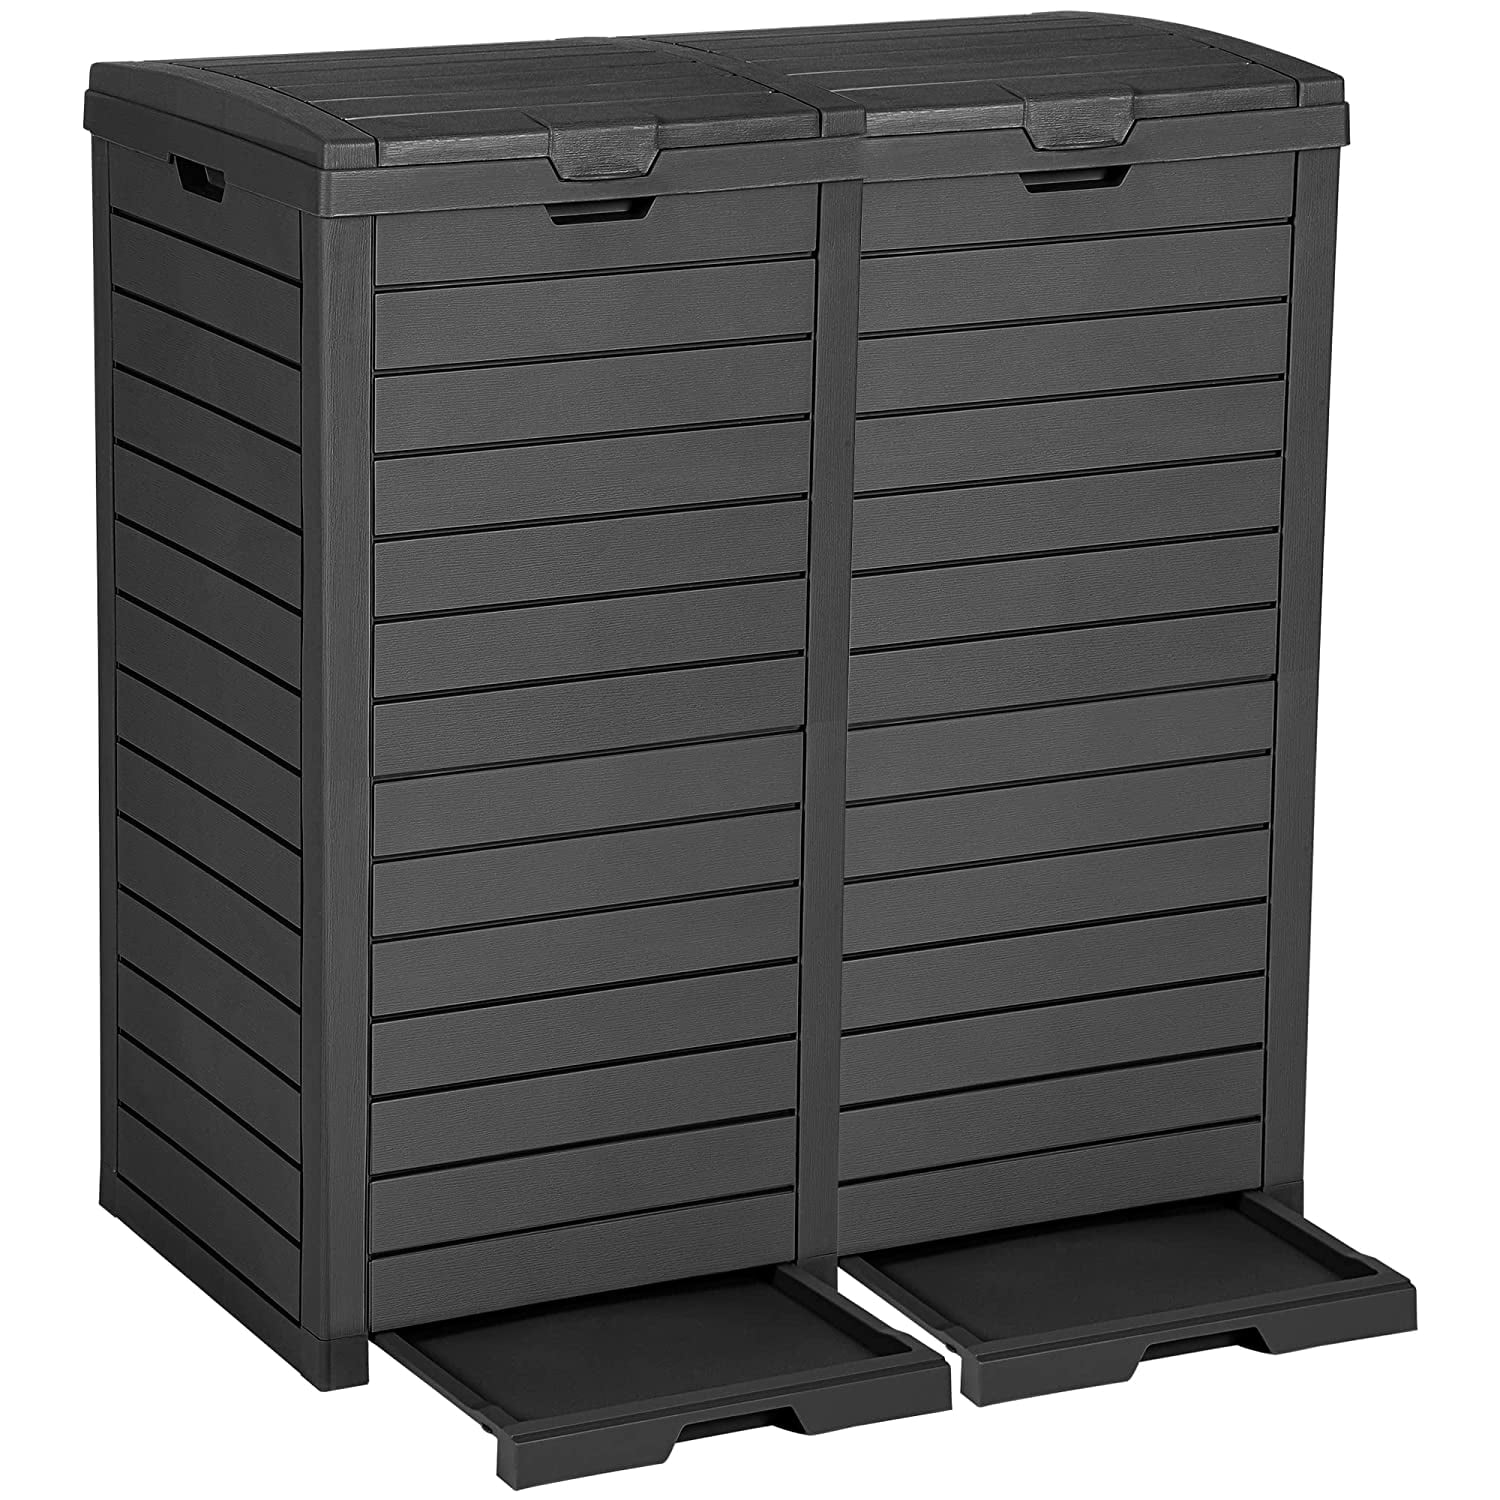 Dextrus Outdoor Large Resin Trash Bins Dual Compartments, 62